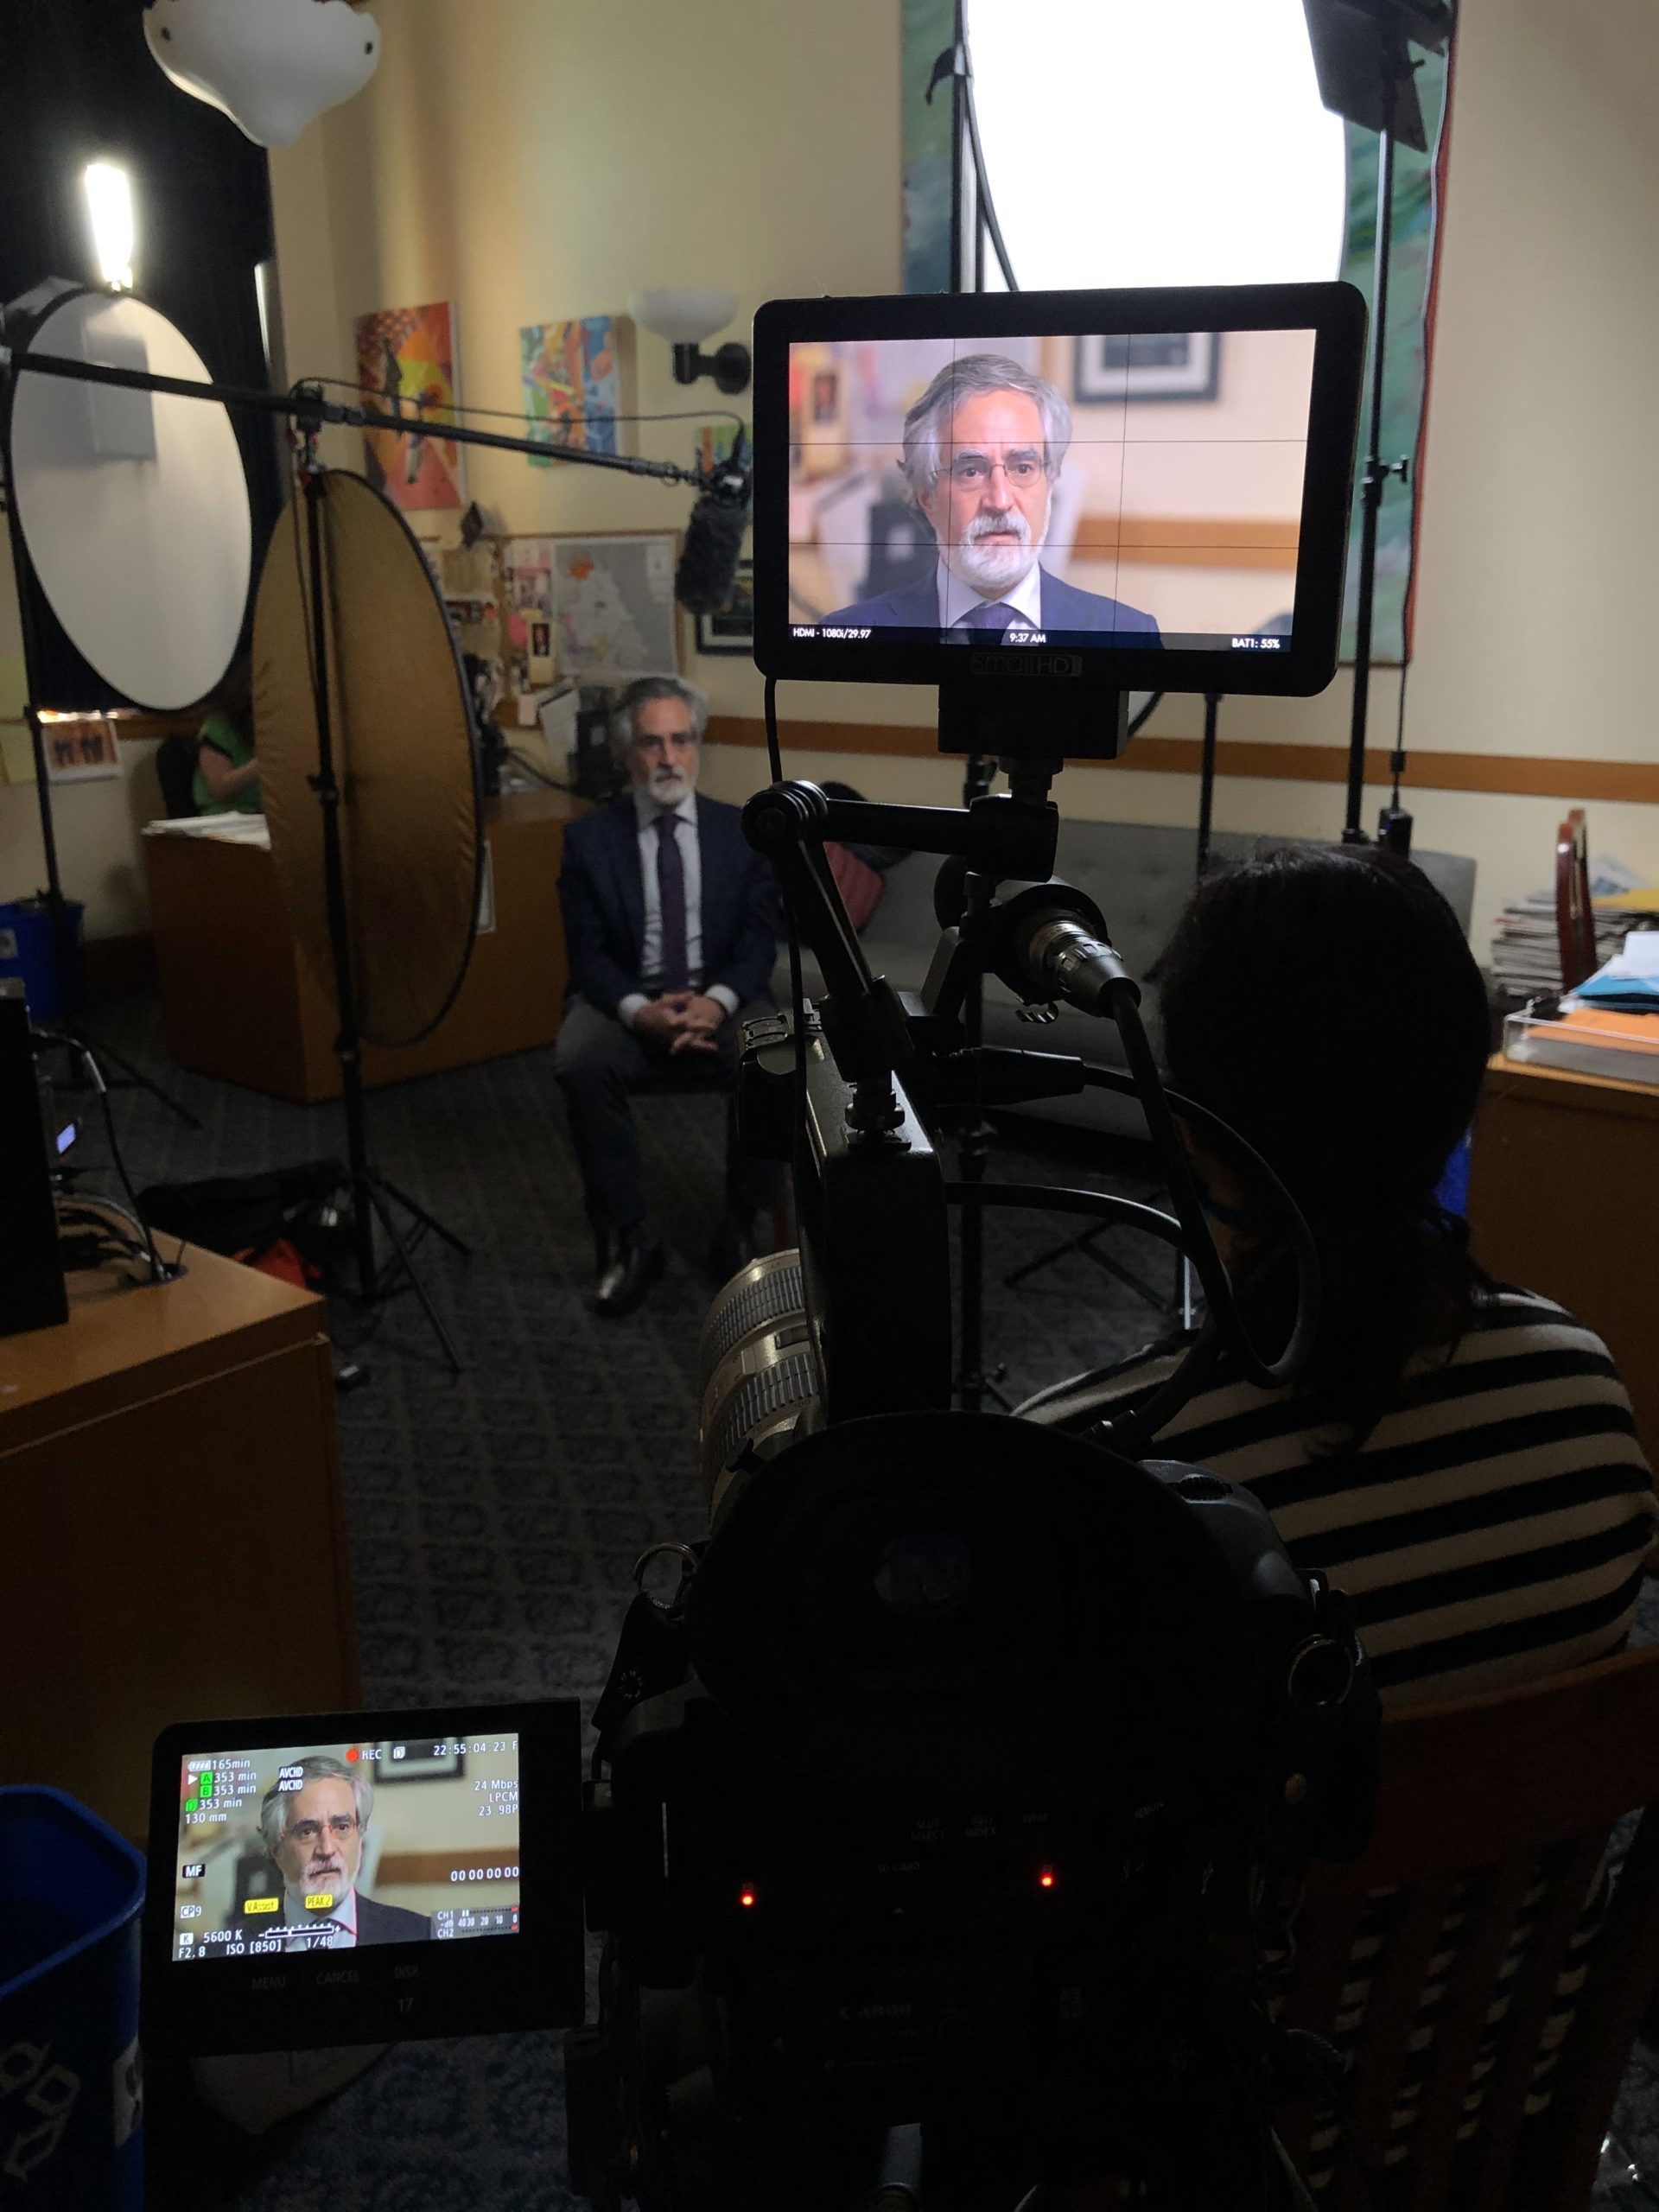 A behind-the-scenes look at a video interview setup in an office. A man in a suit sits in a chair, facing the camera. Professional lighting and filming equipment surround him, with camera monitors displaying close-up shots of the interviewee. This setup captures the high standards of Berkeley Journalism.